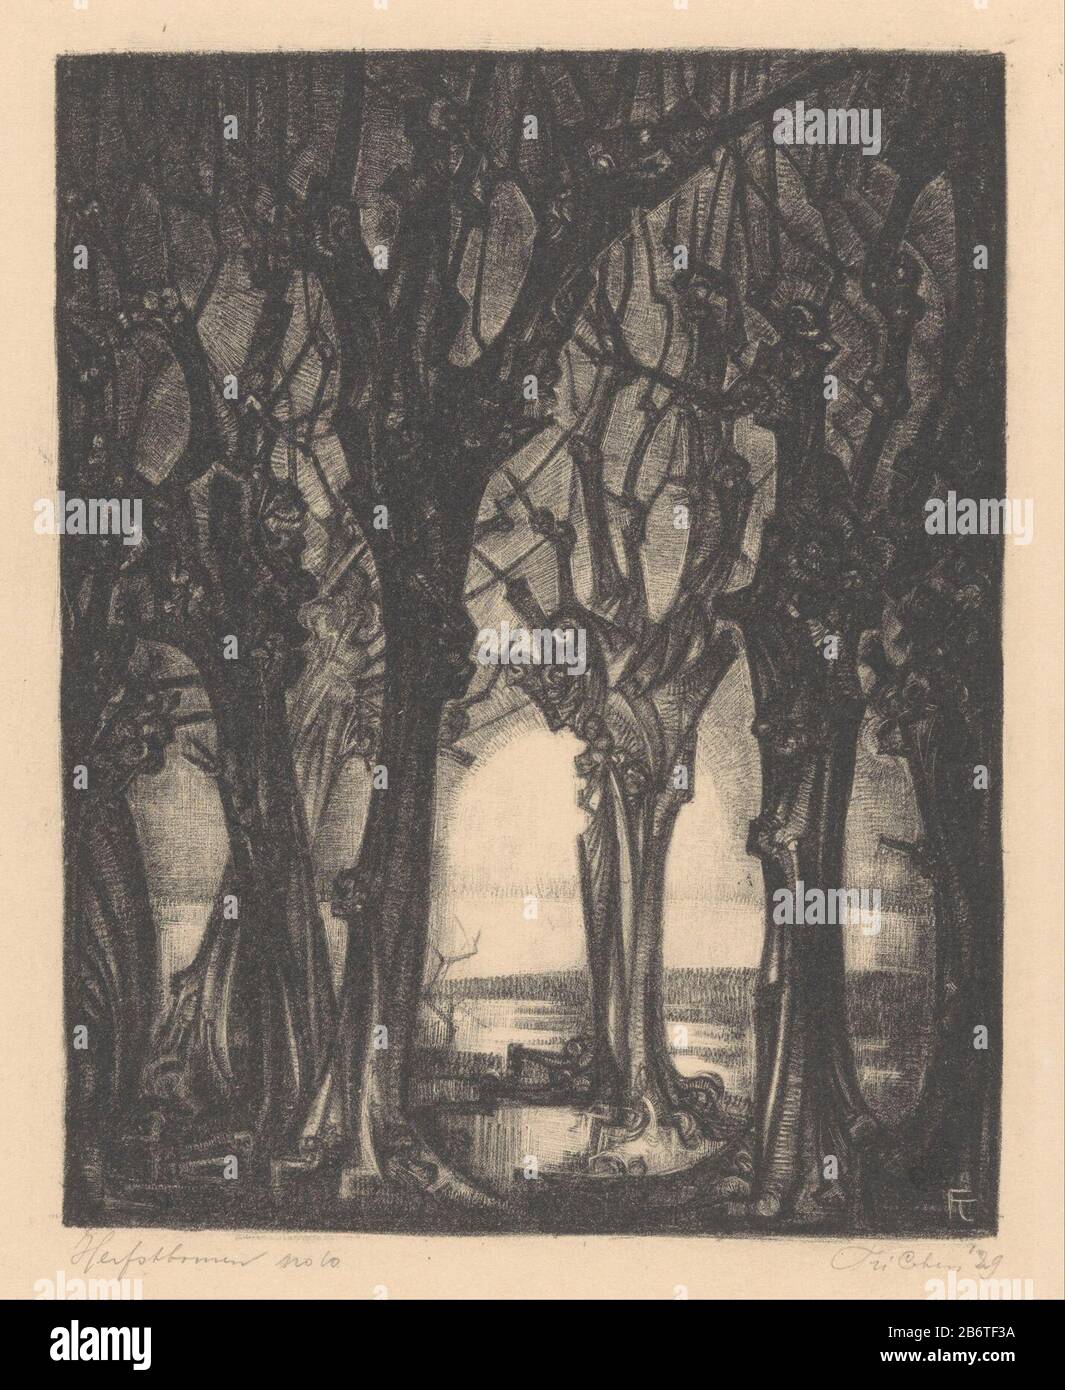 Herfstbomen (originele titel op object) Trees without leaves together. In the background the sun to horizon. Manufacturer : printmaker: Frederika Sophia Cohen (personally signed) Date: 1929 Material: paper Technique: lithography (technique) Dimensions: sheet: H 246 mm × W 201 mm Subject: autumn landscape; landscape symbolizing autumn (the four seasons of the year) trees (+ standard plant) Stock Photo